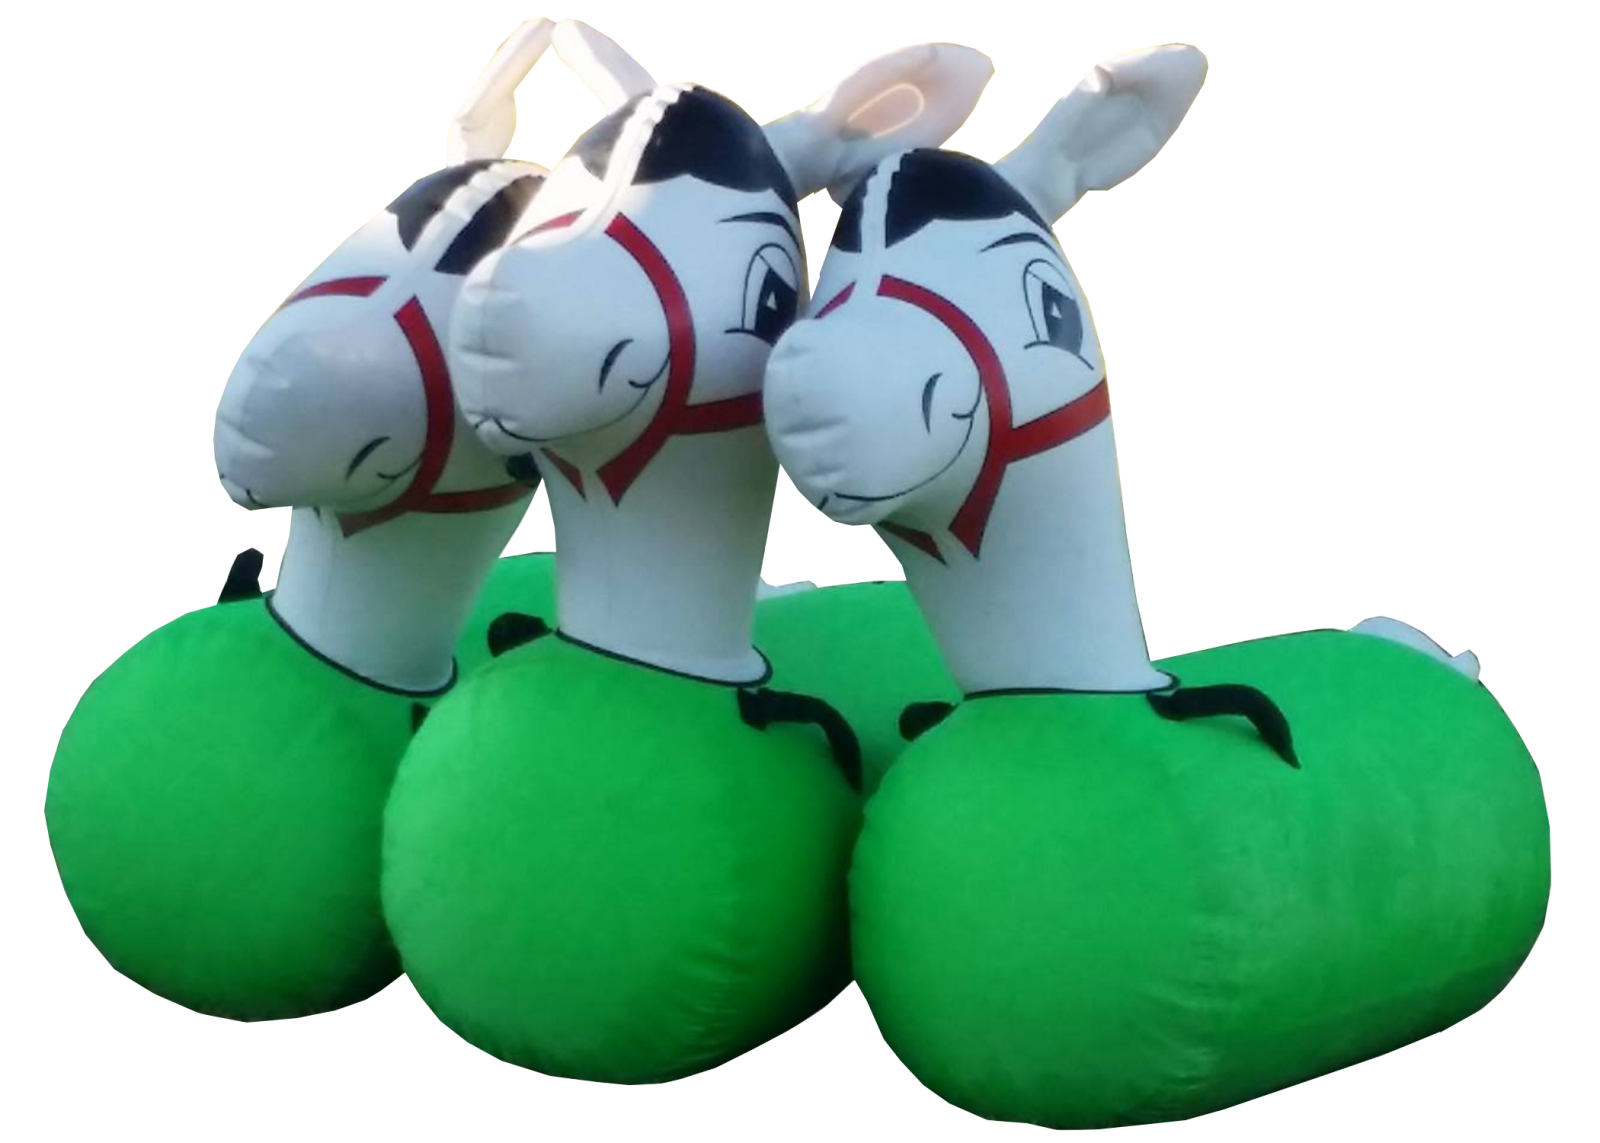 Inflatable horses for rent